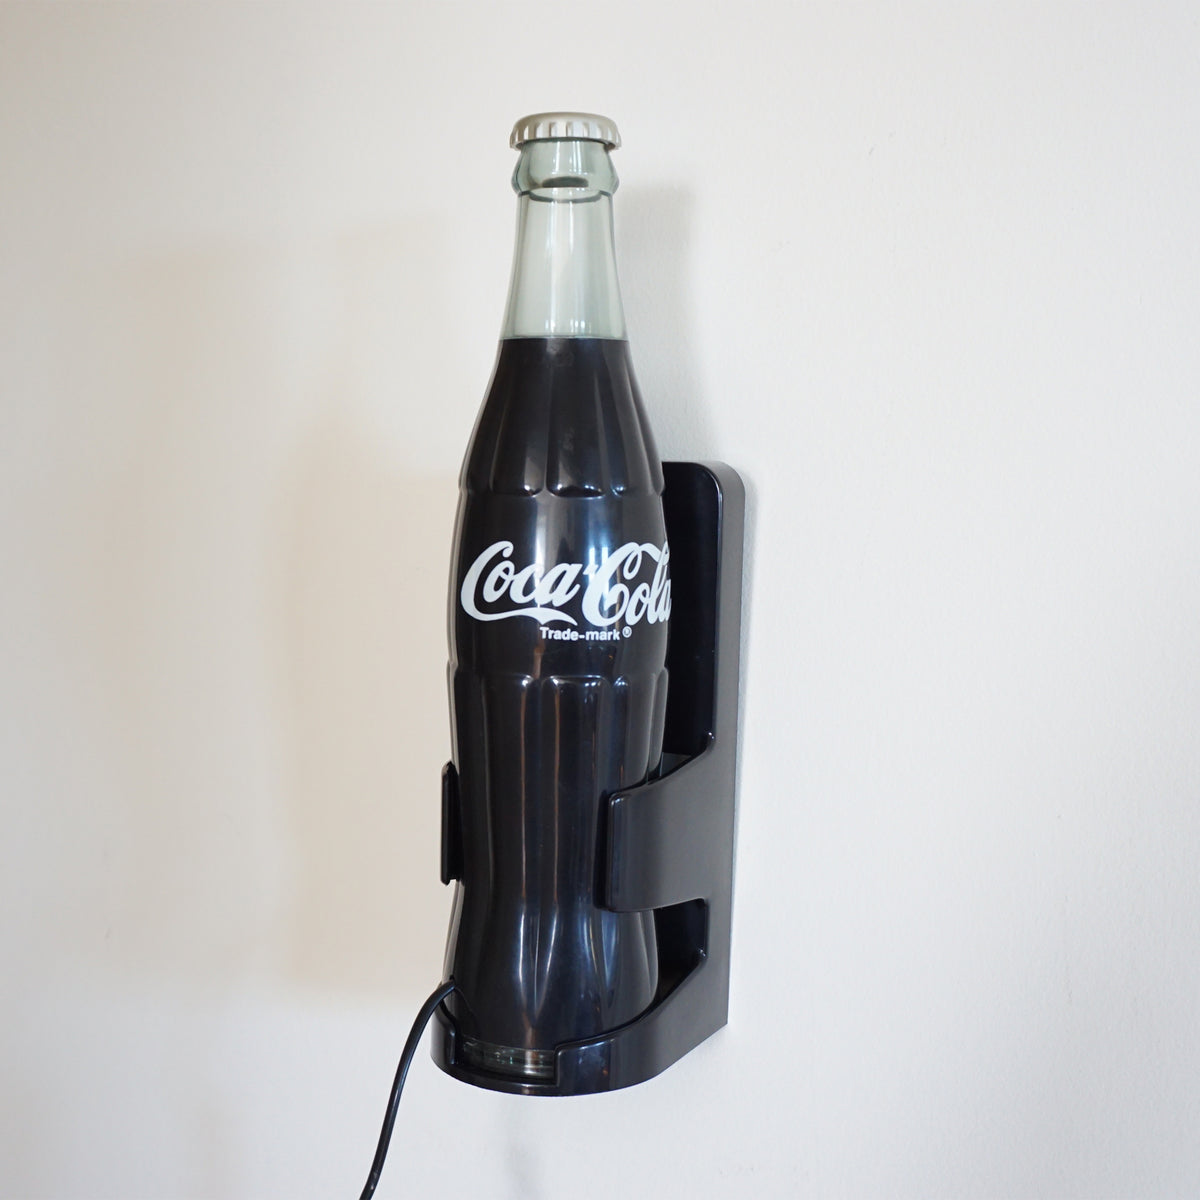 1983 Vintage COCA-COLA Bottle Shaped Full Feature Electronic Corded Phone.  Model 5000. Made by Arrow Trading Company.